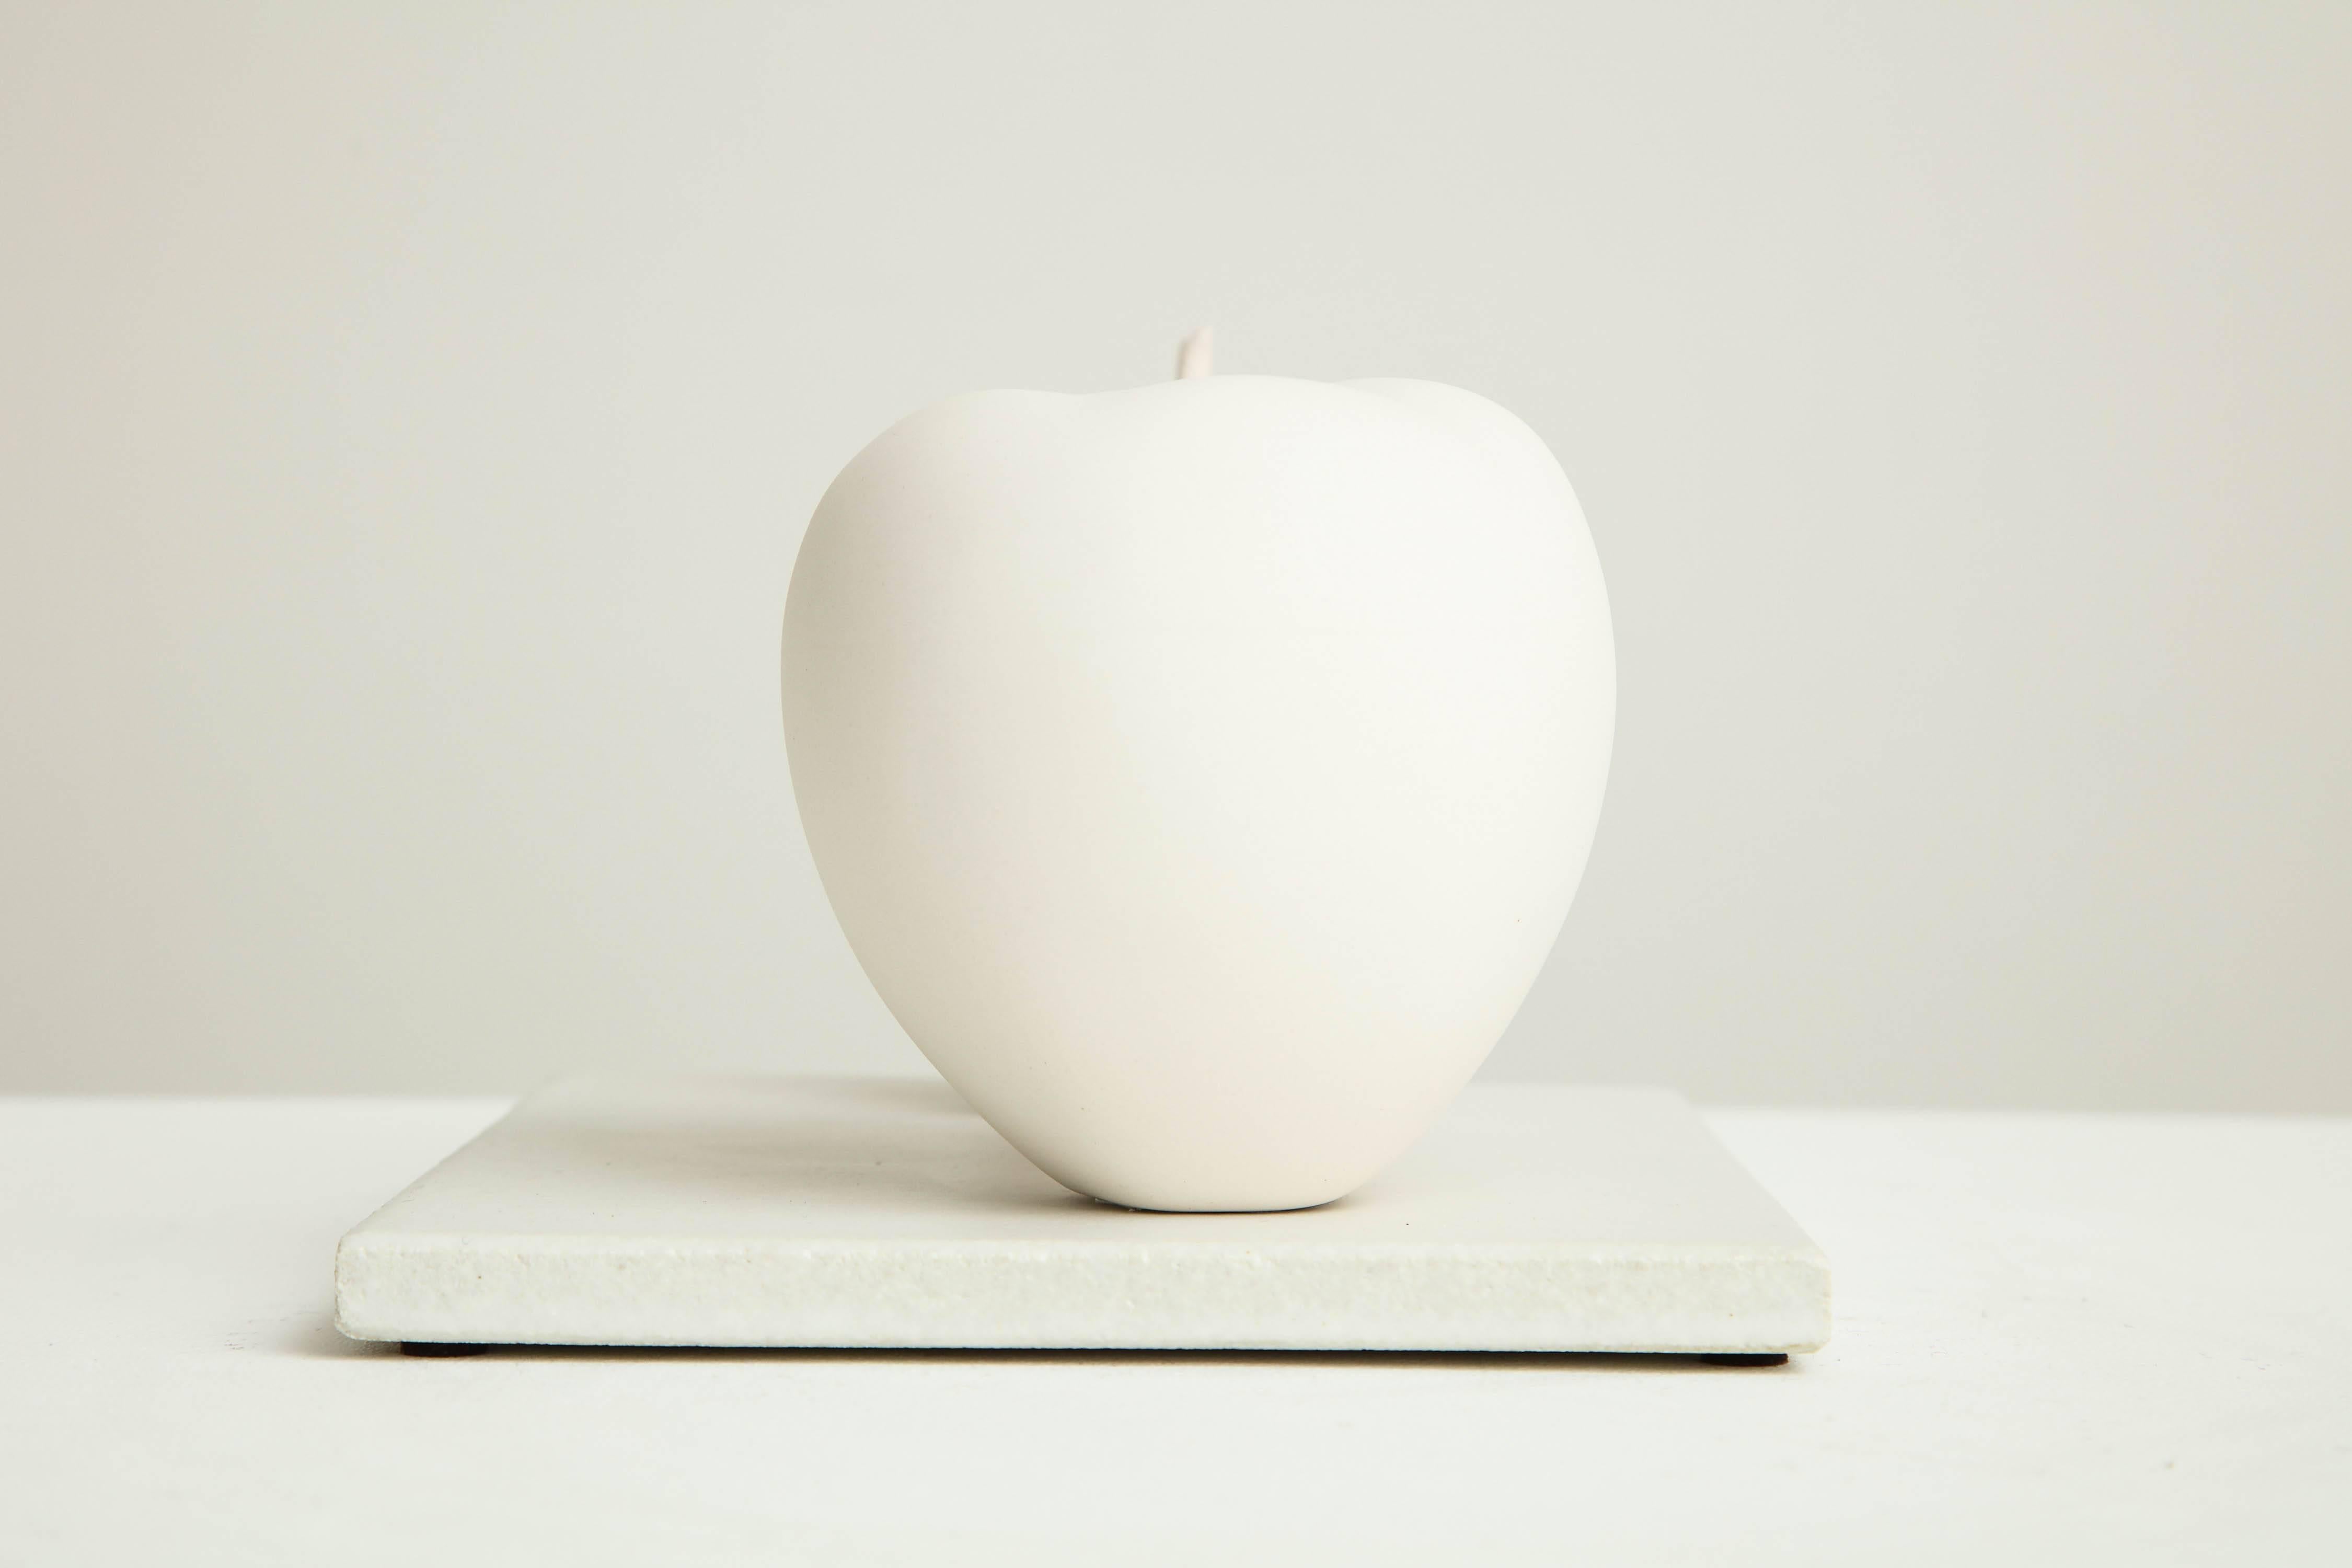 American Porcelain Still Life in White with Apple and Pear by Anat Shiftan, 2017